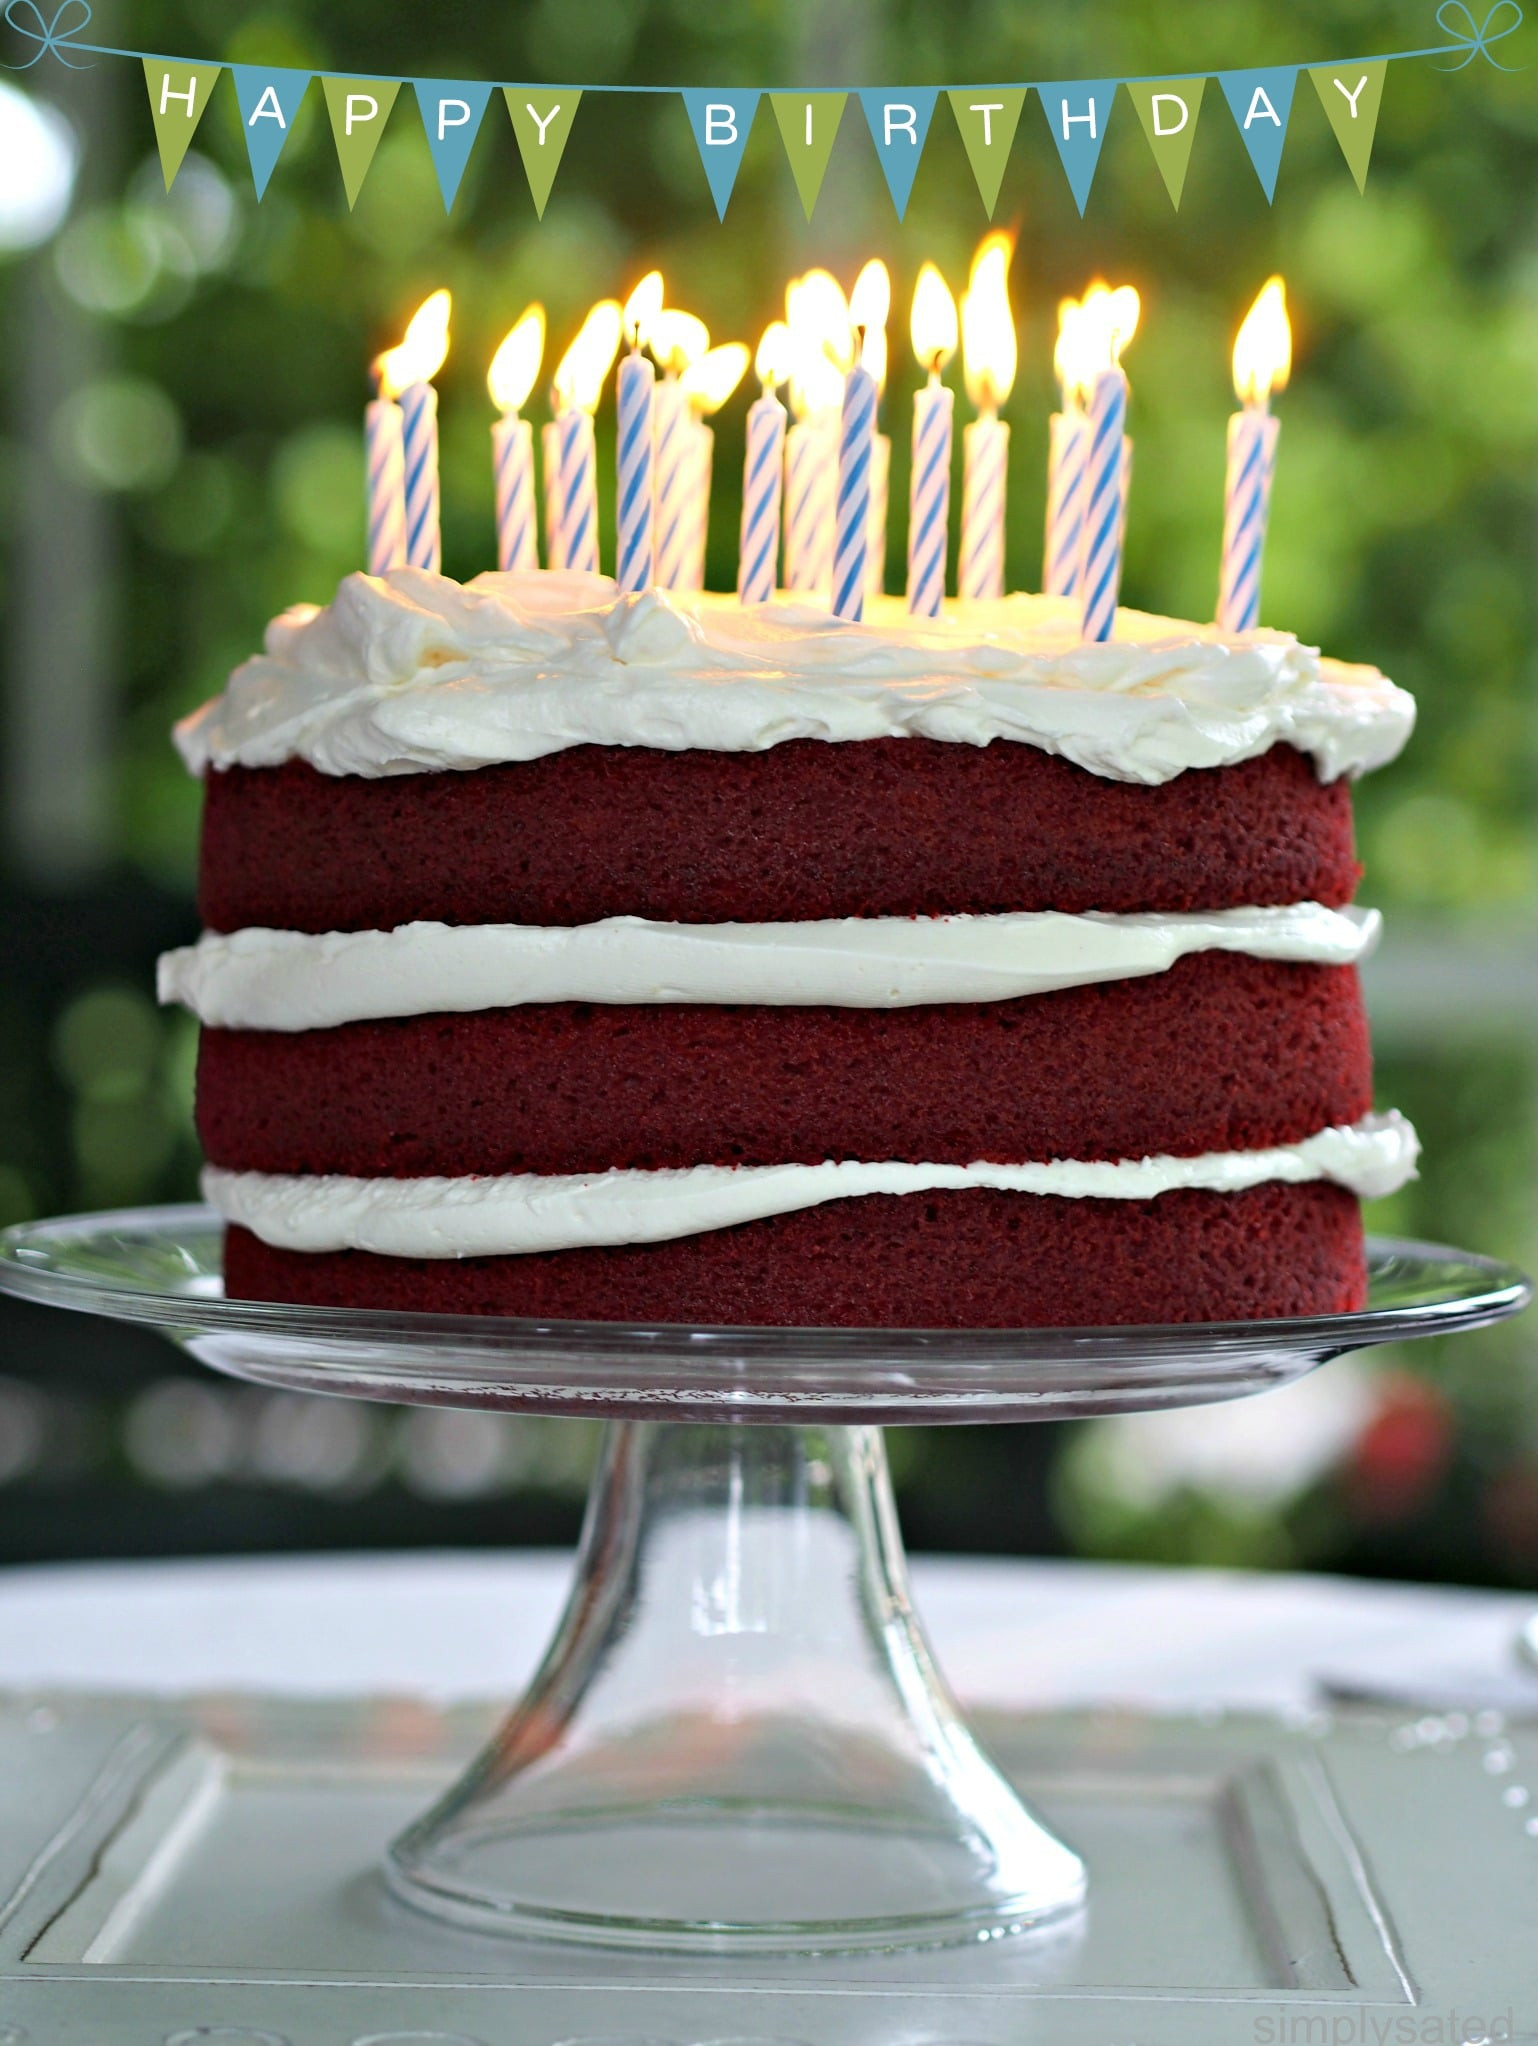 Pictures Of Happy Birthday Cakes
 Red Velvet Cake Simply Sated